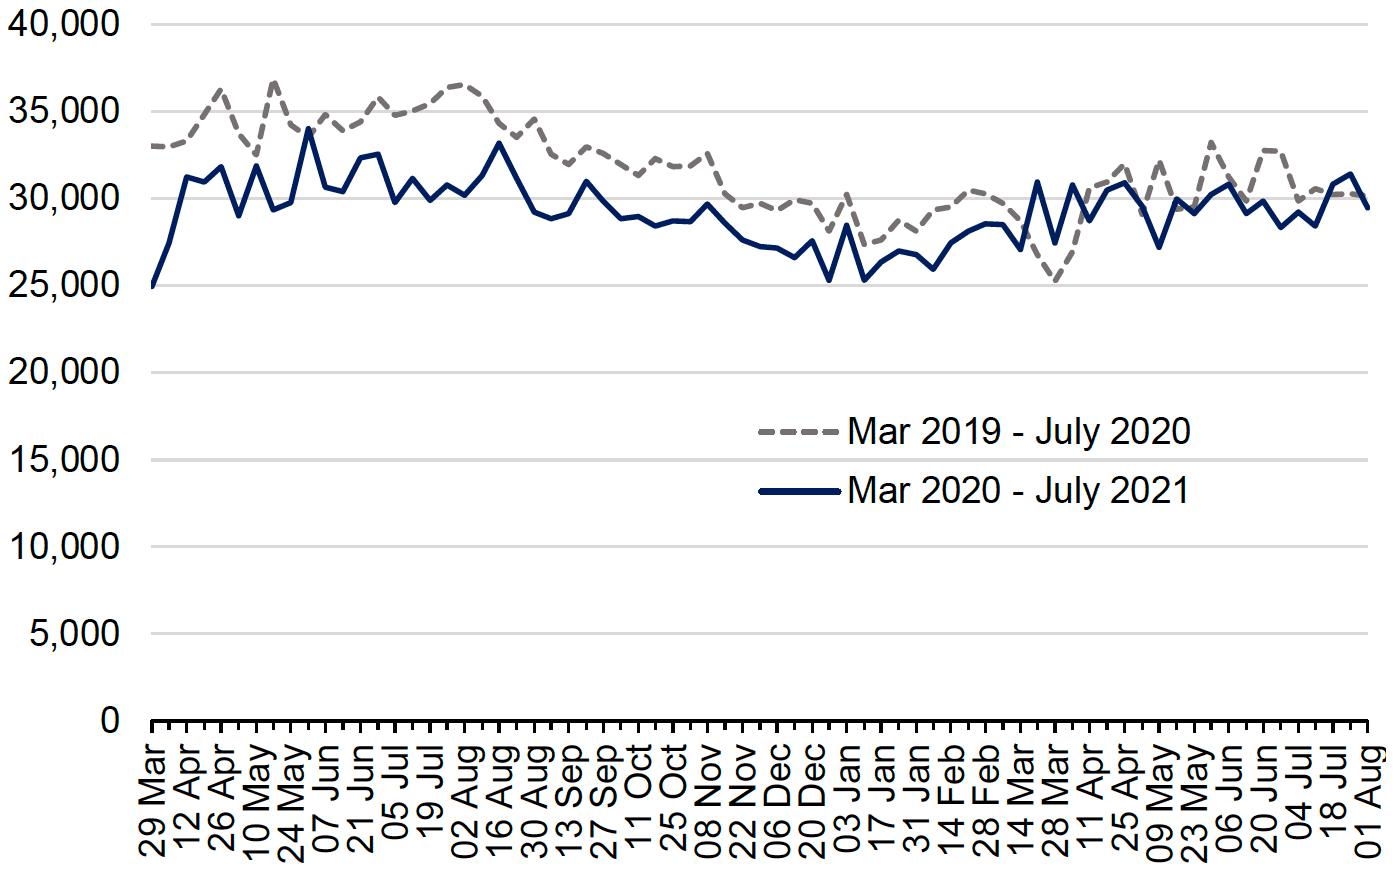 Line graph showing incidents recorded by Police Scotland in March 2019-July 2020, compared to March 2020-July 2021